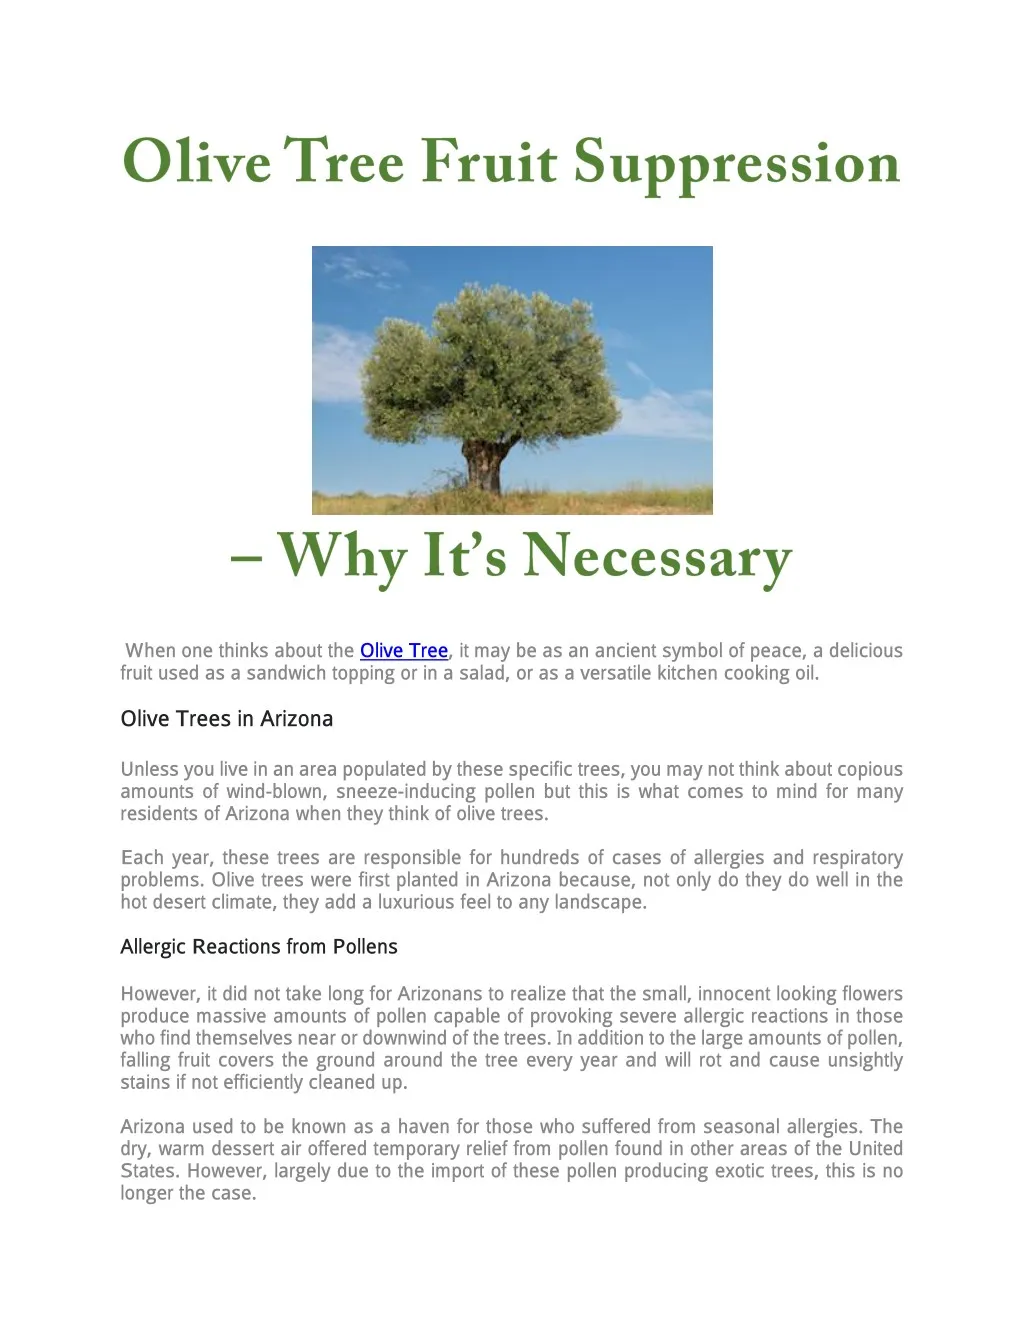 when one thinks about the olive tree